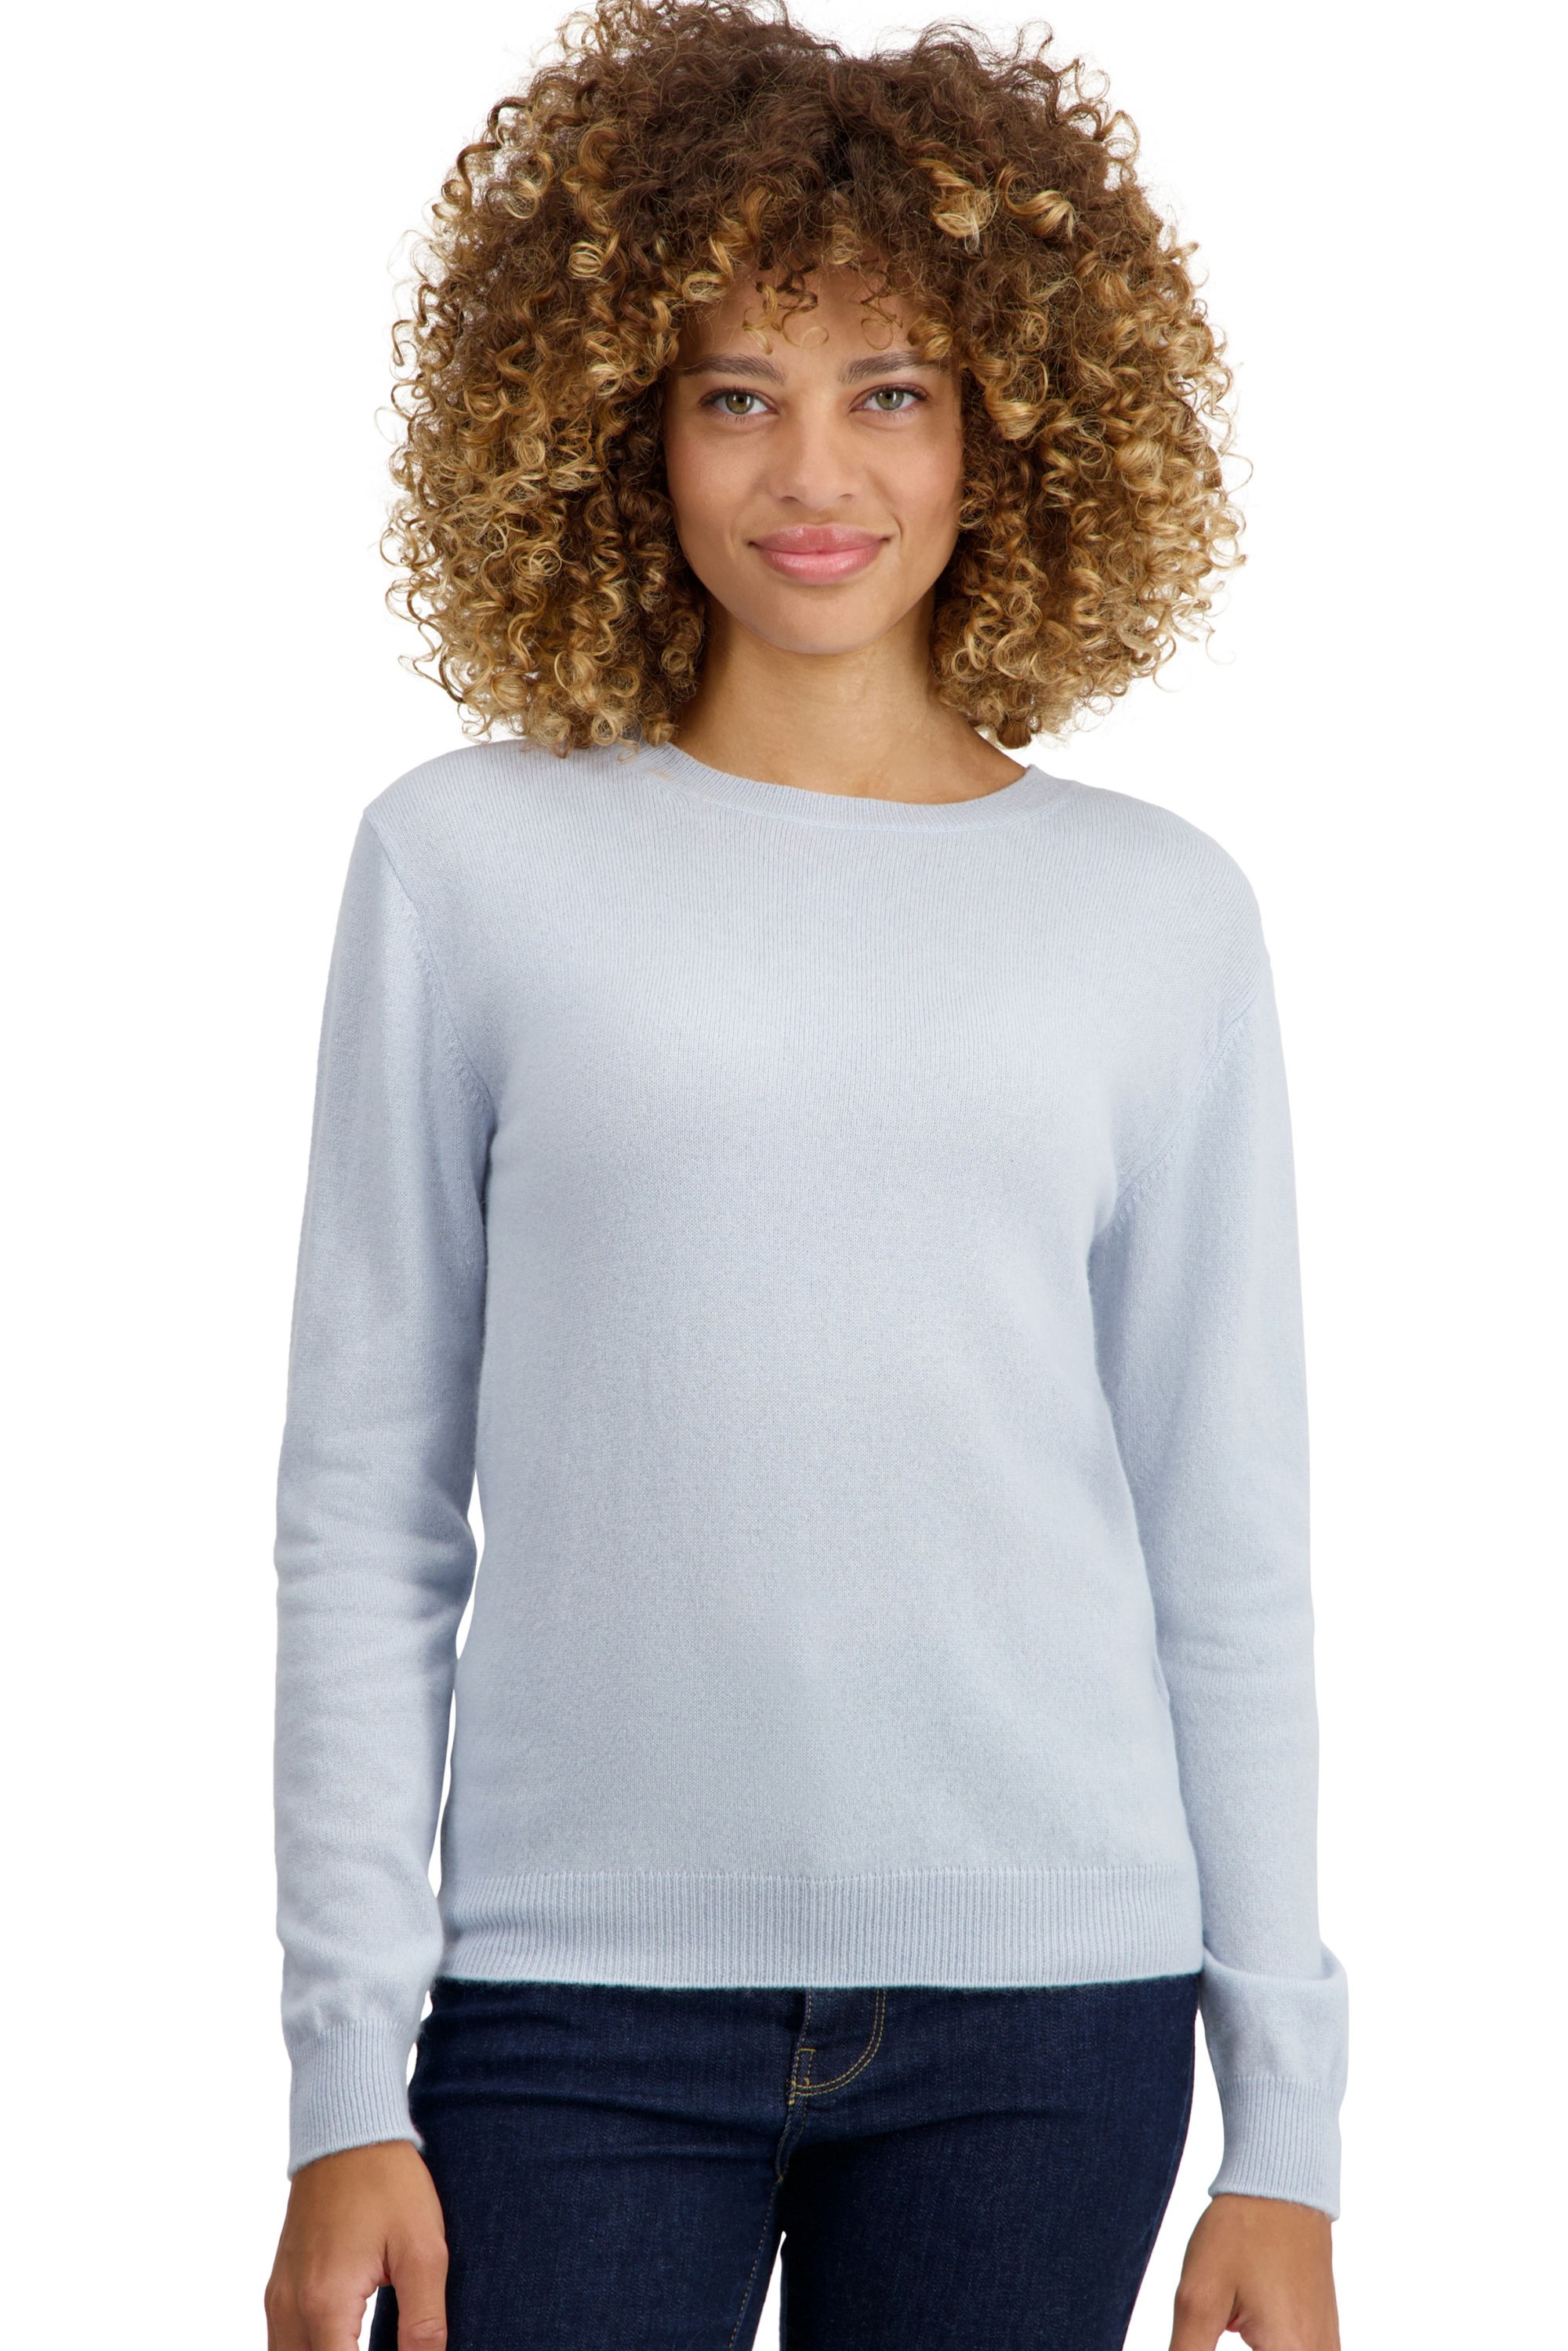 Cashmere ladies basic sweaters at low prices thalia first whisper m